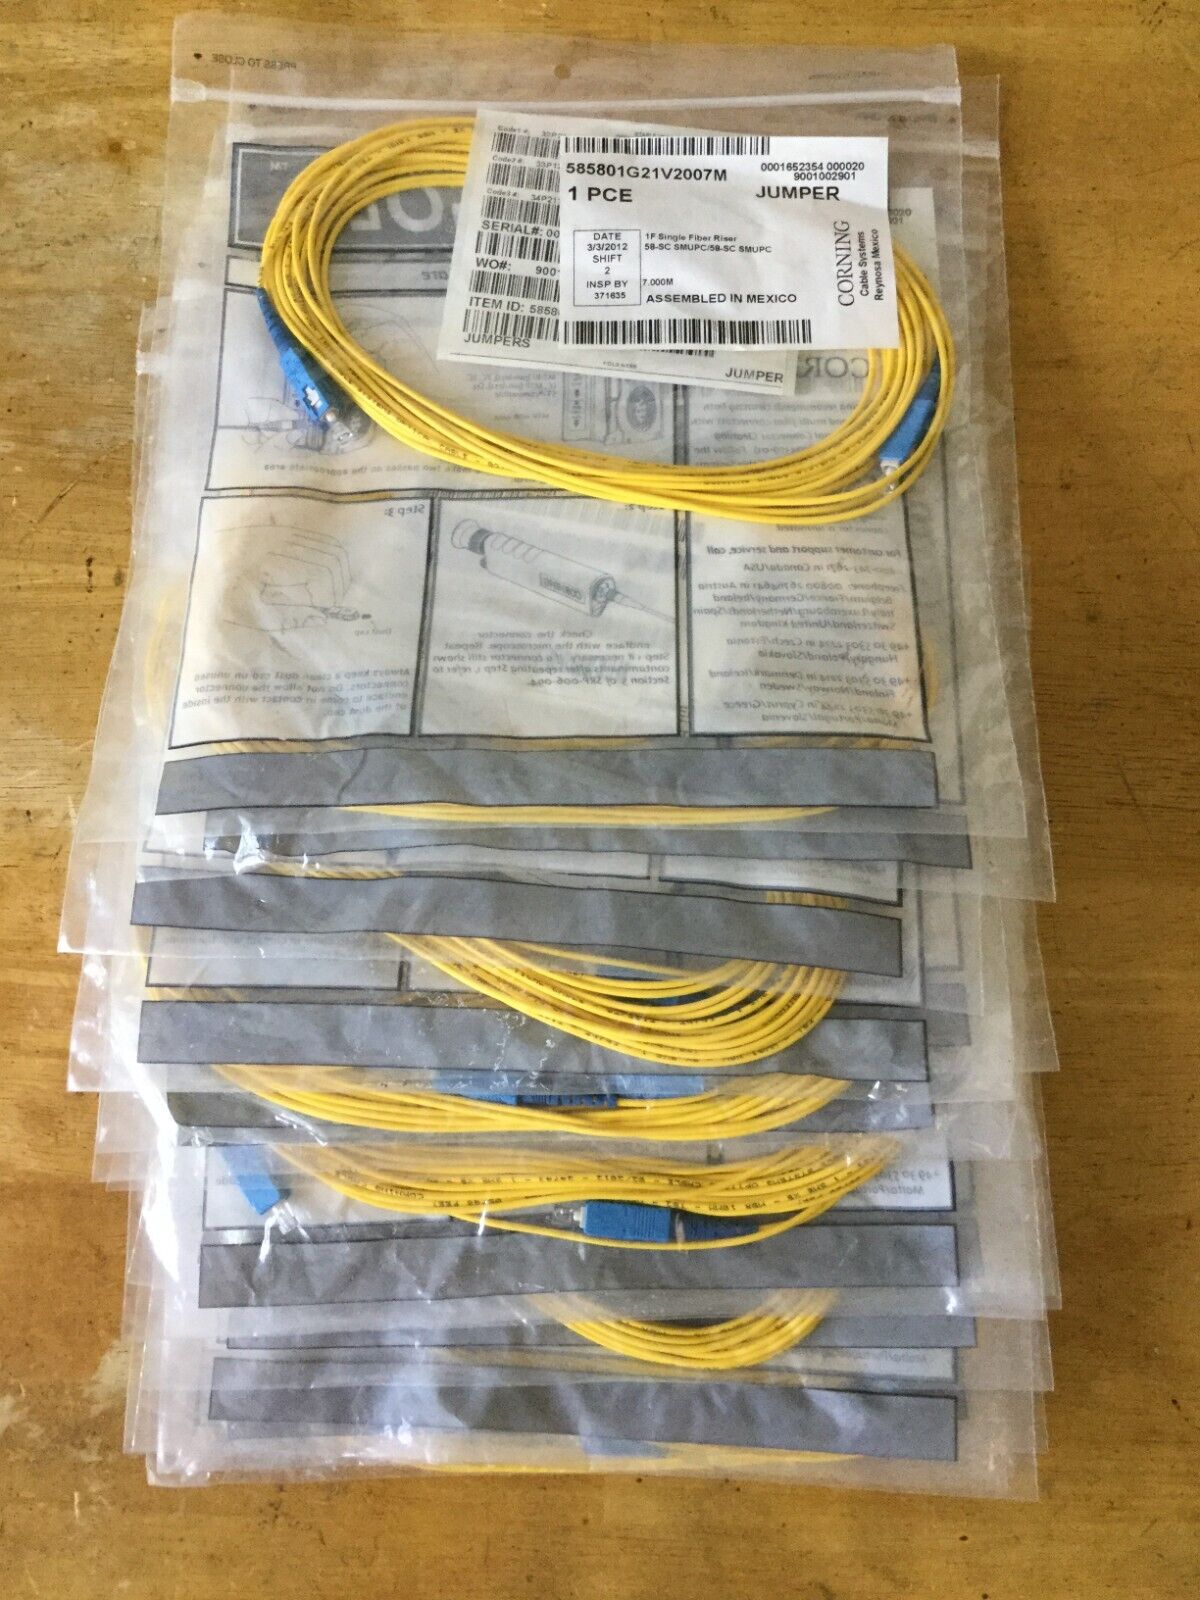 Lot of 8 - Corning Fiber Optic Patch Cord Jumper Cable 1F SC/SC SMUPS - 7 Meters